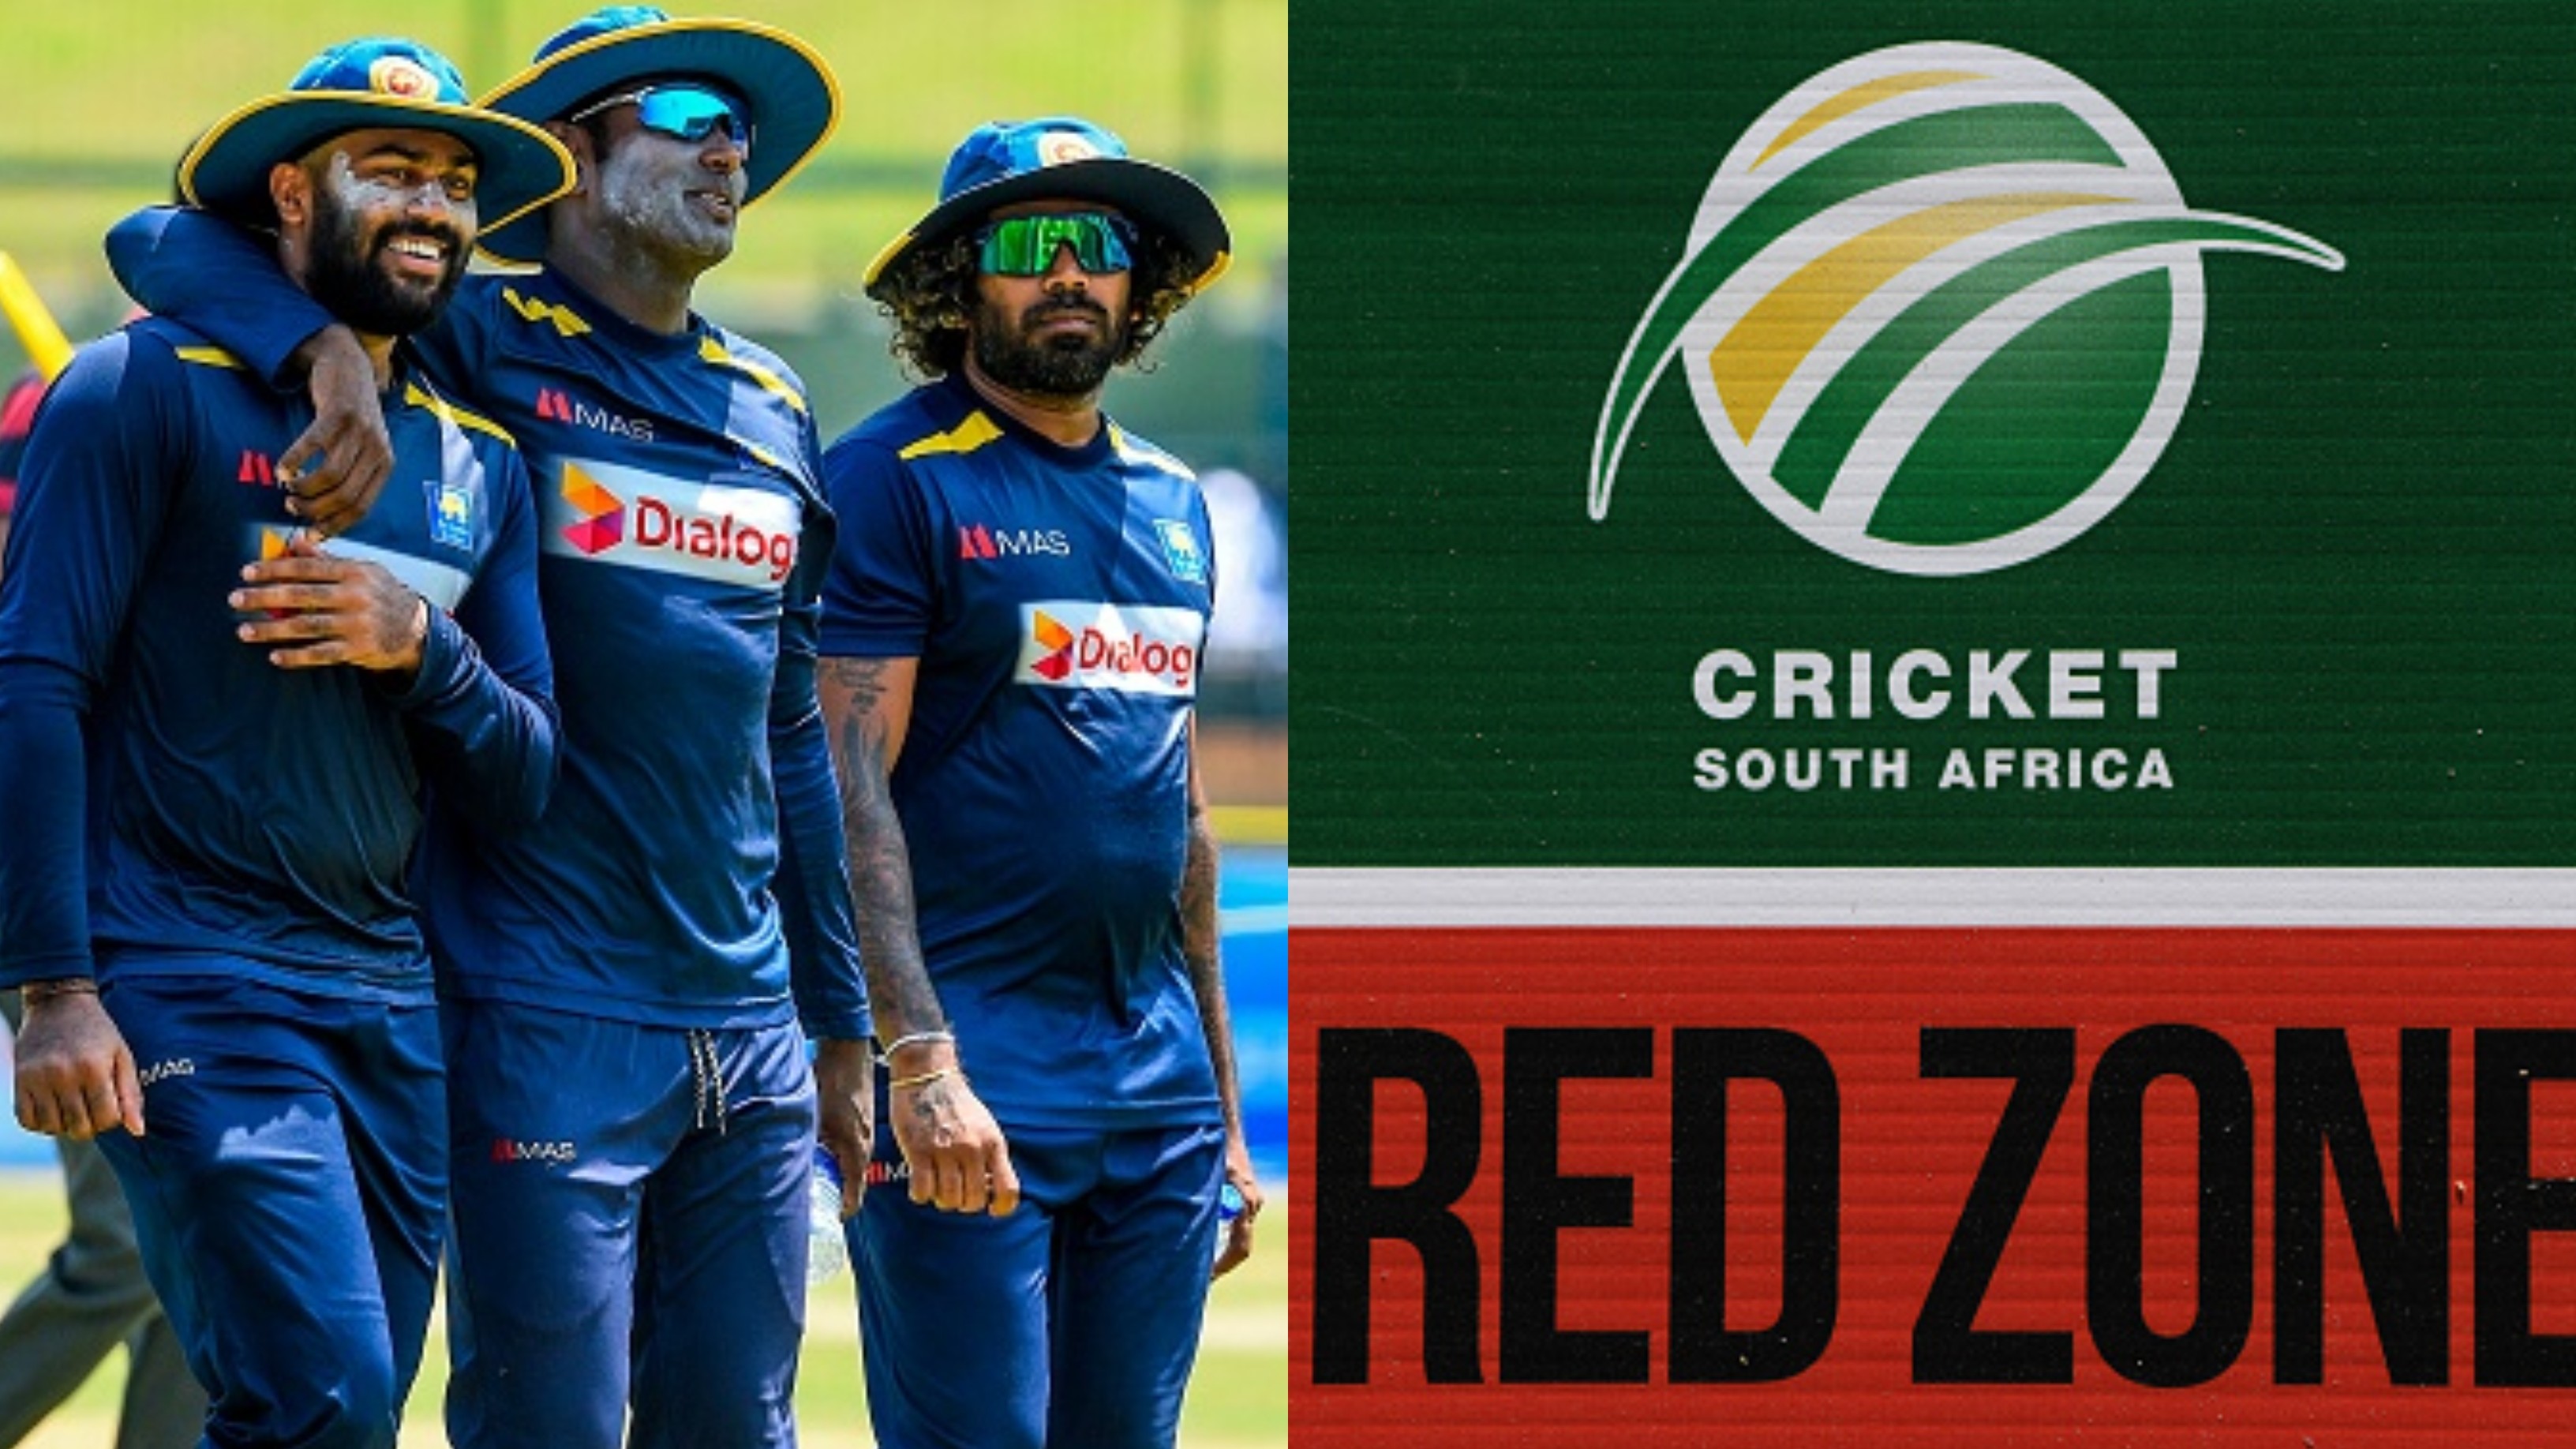 Sri Lanka in view of canceling South Africa tour due to Coronavirus protocol concerns 